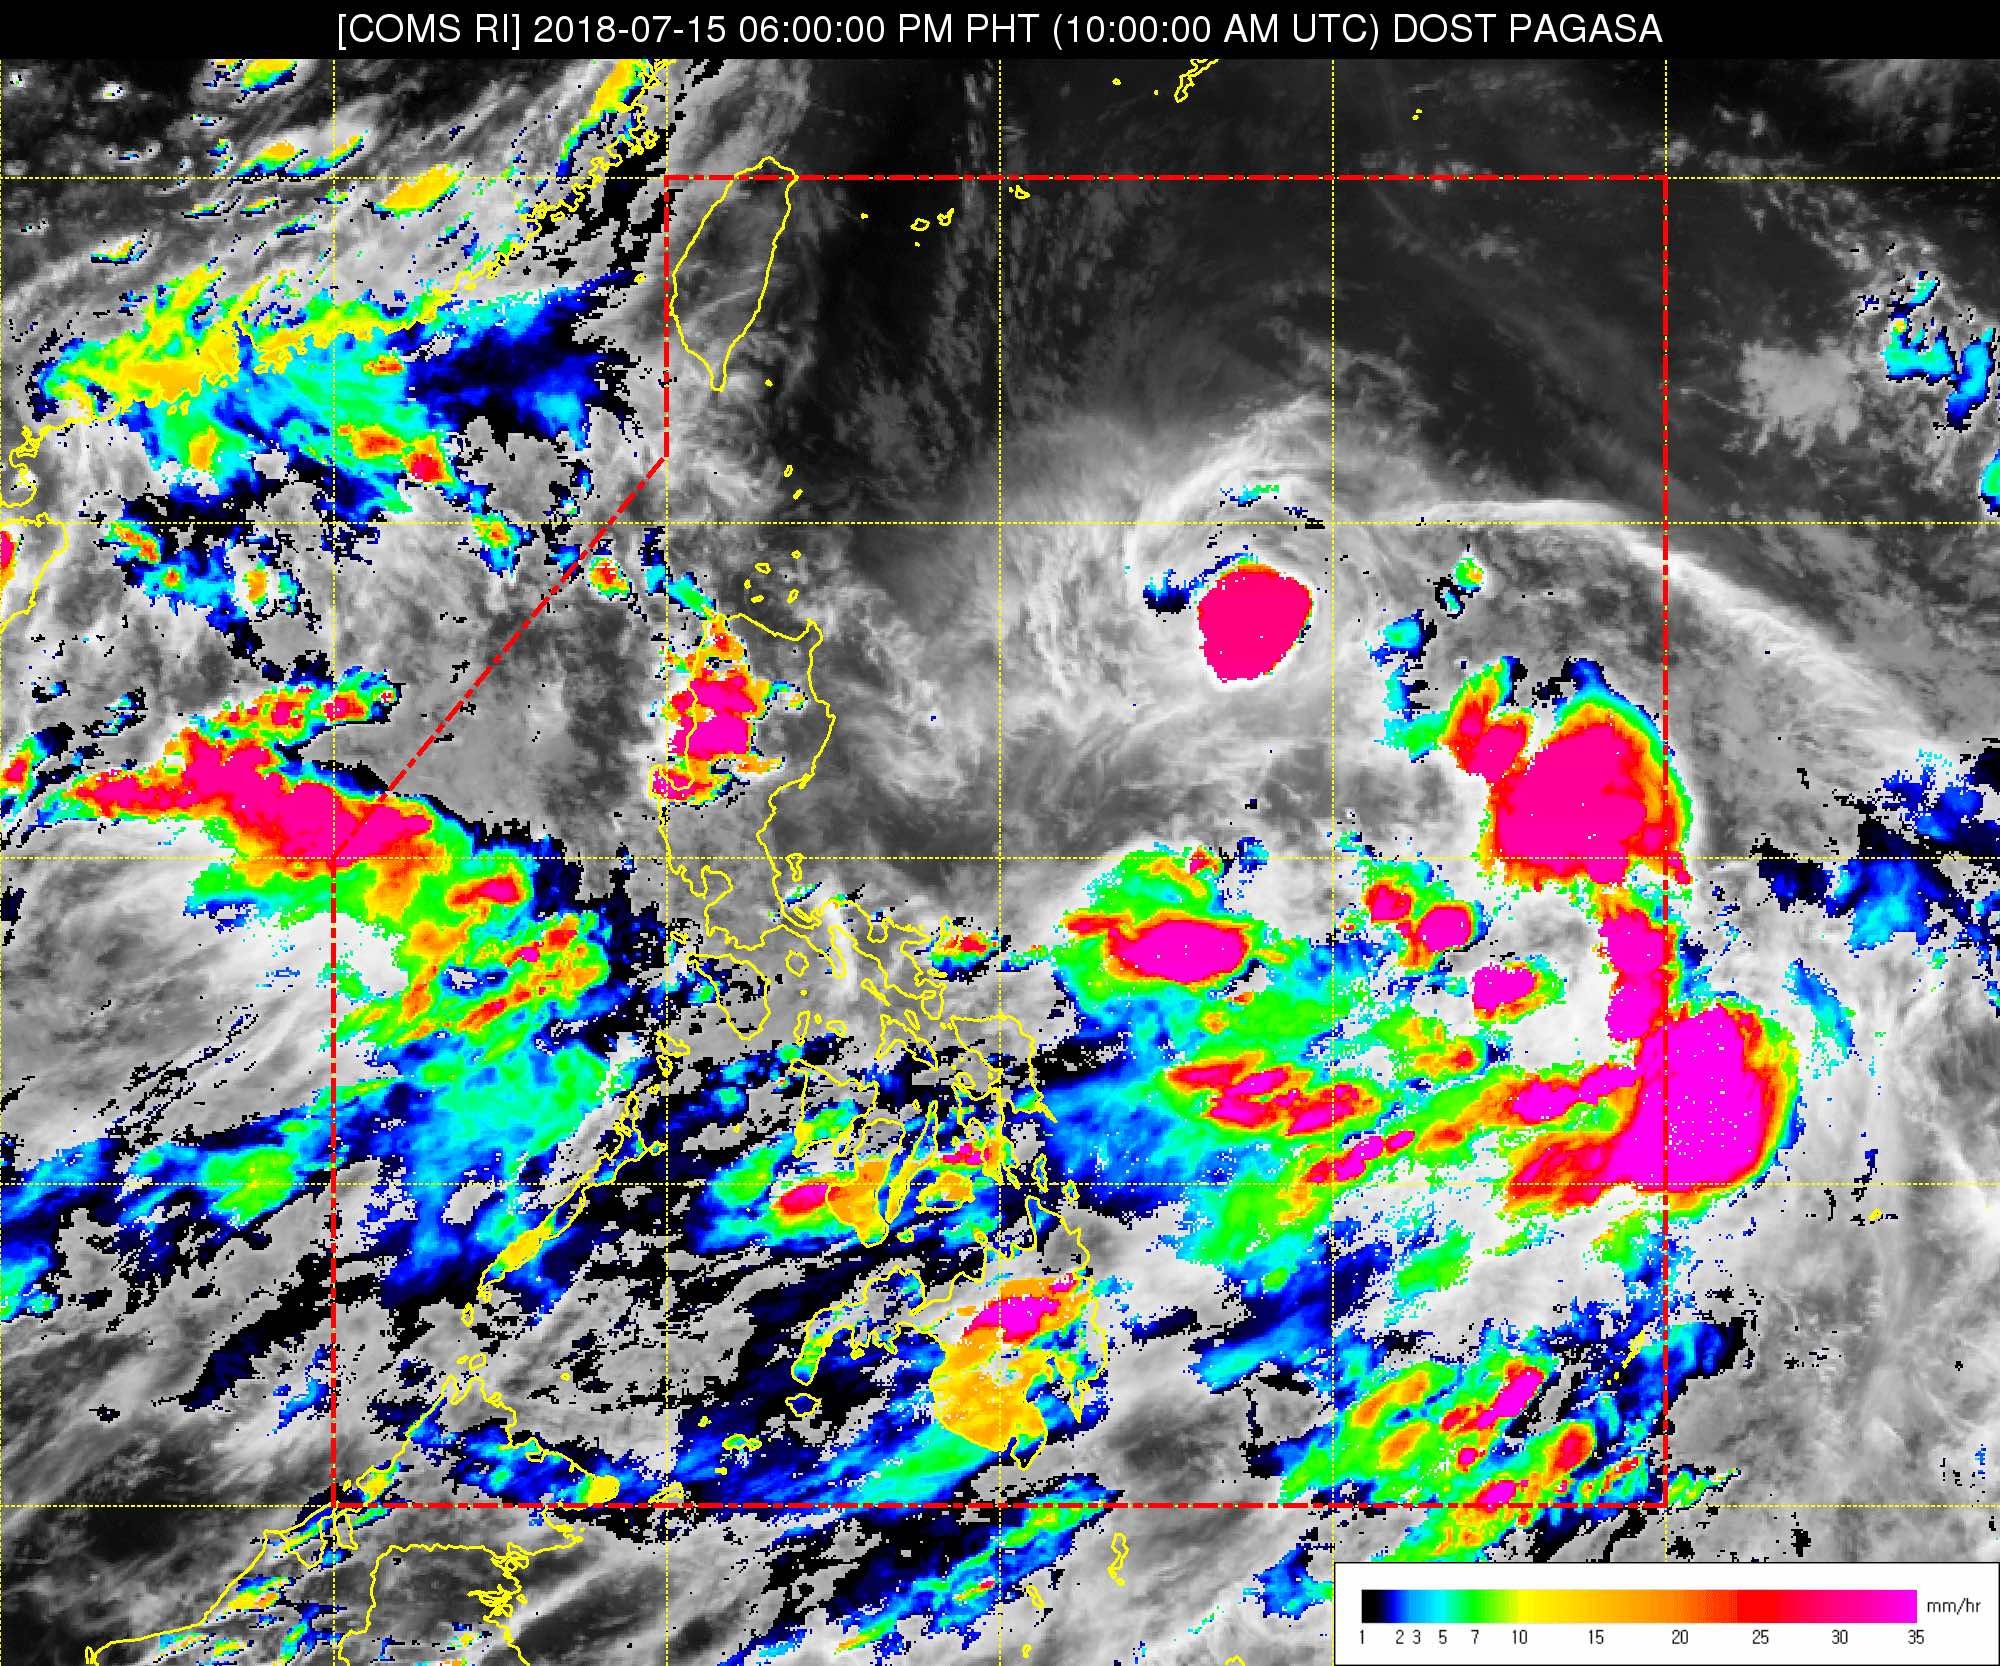 LPA could become tropical depression on July 15 or 16